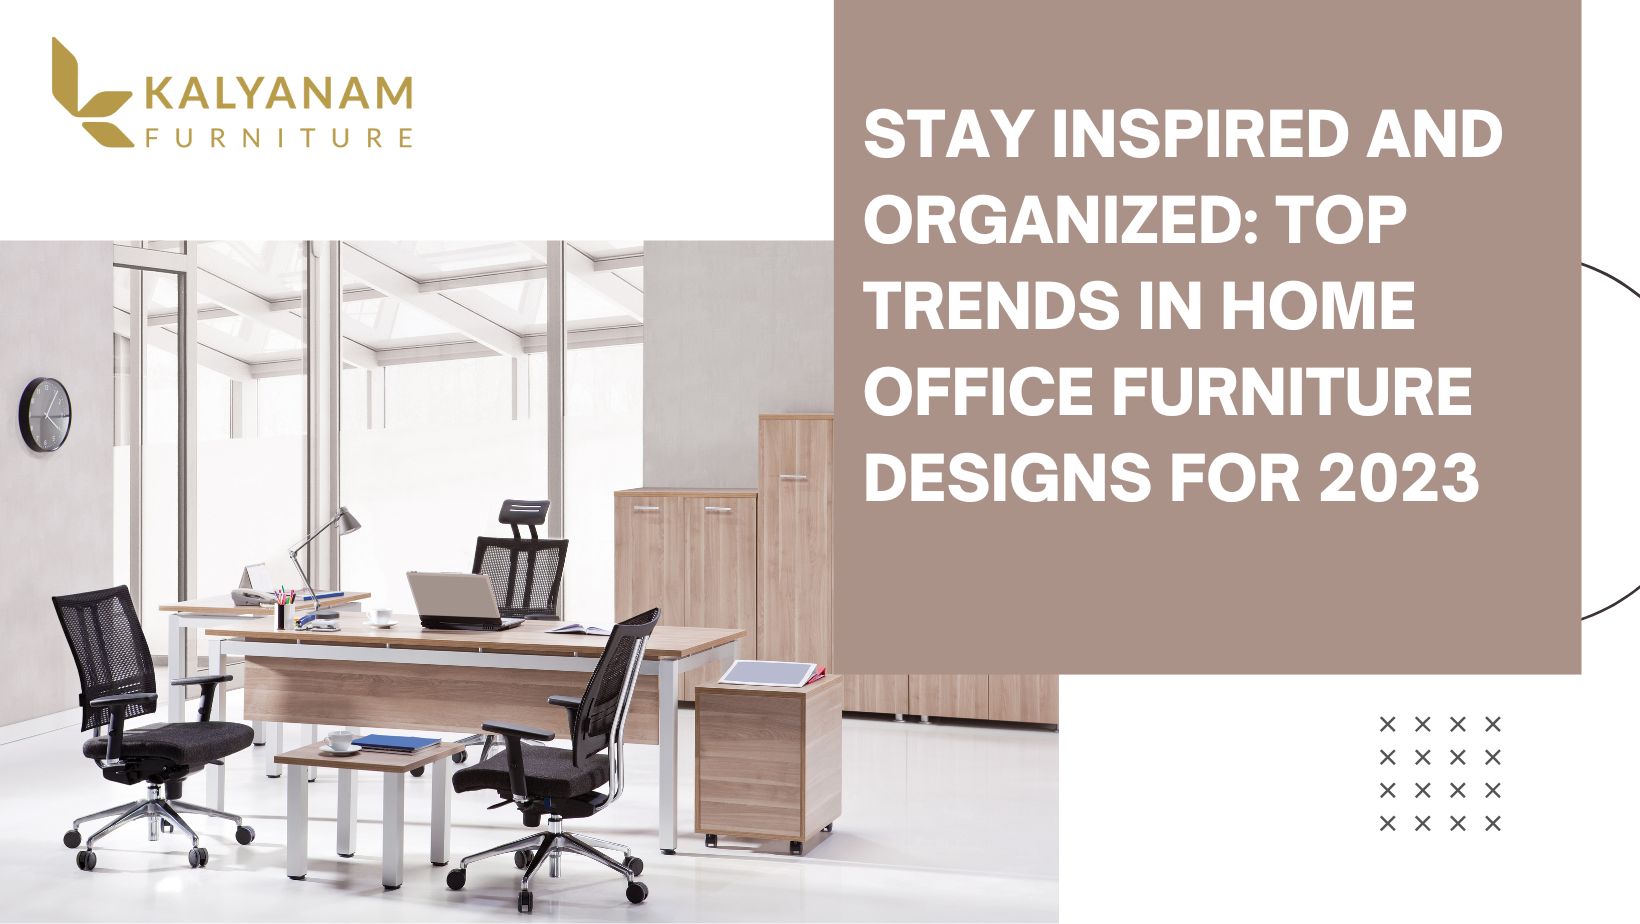 Stay Inspired and Organized Top Trends in Home Office Furniture Designs for 2023